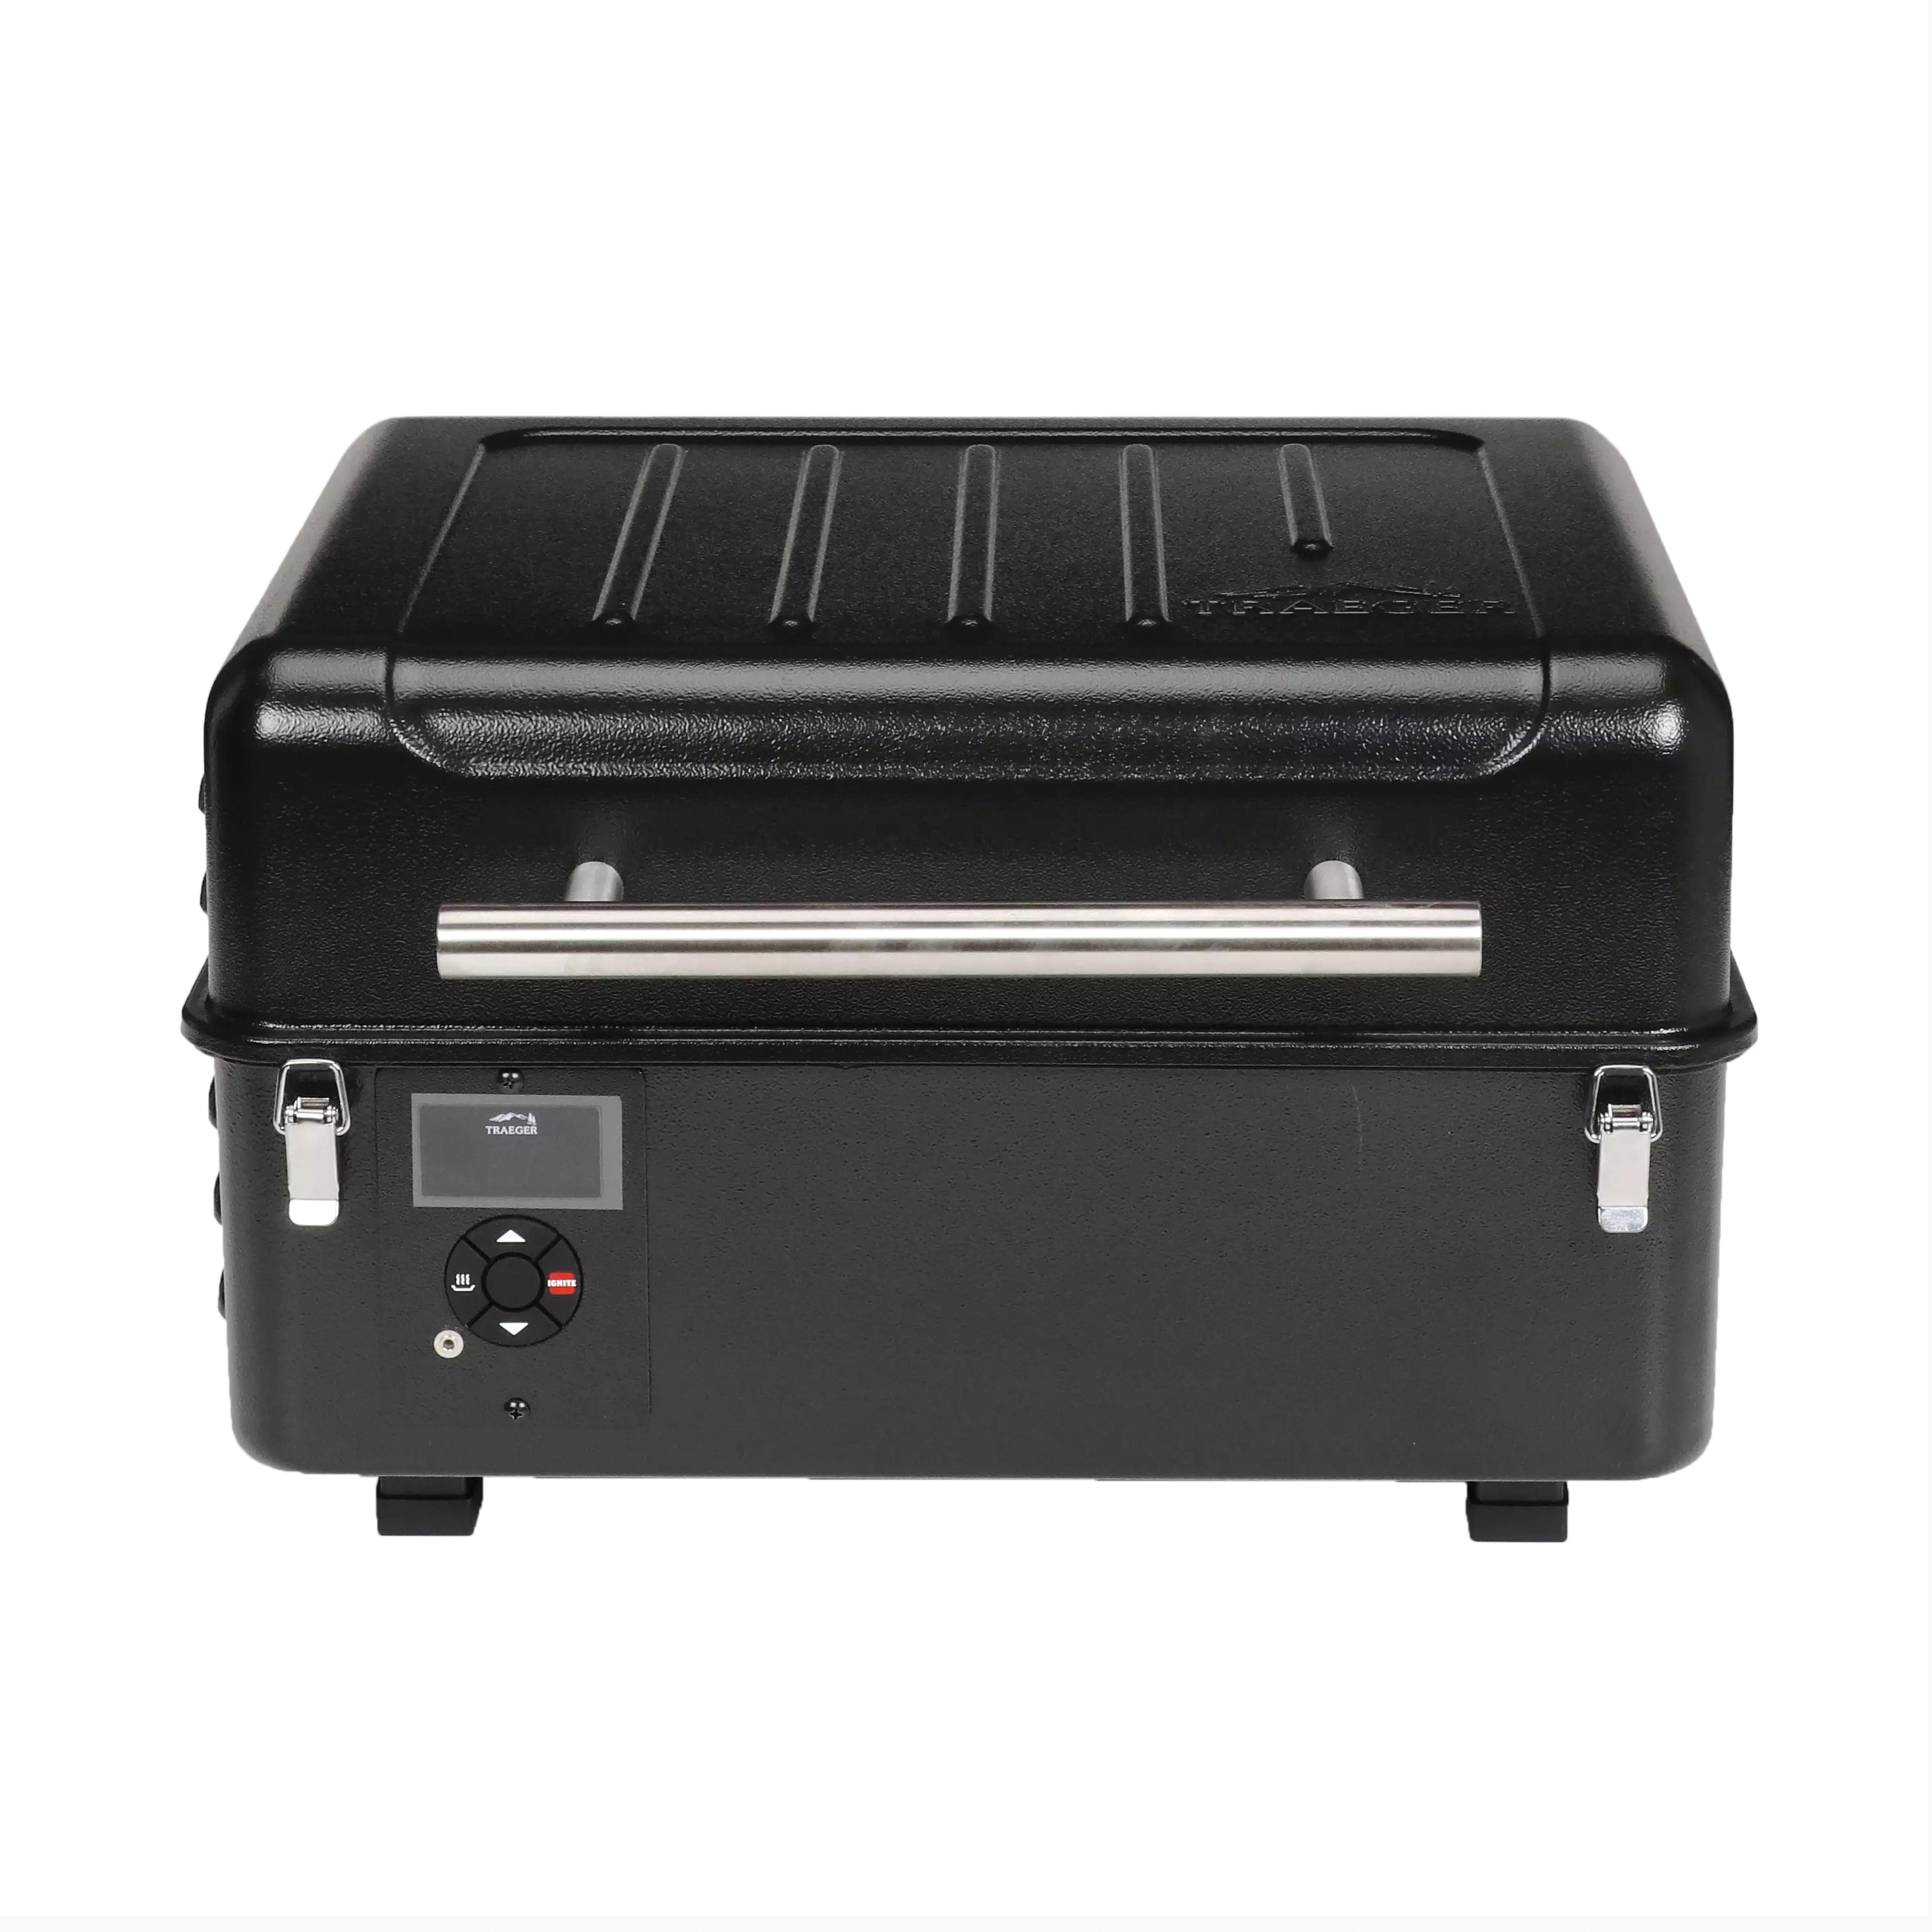 Portable TFT18KLD Ranger Pellet Grill, 36000 Btu, 184 sq-in Primary Cooking Surface, Steel Body, Black